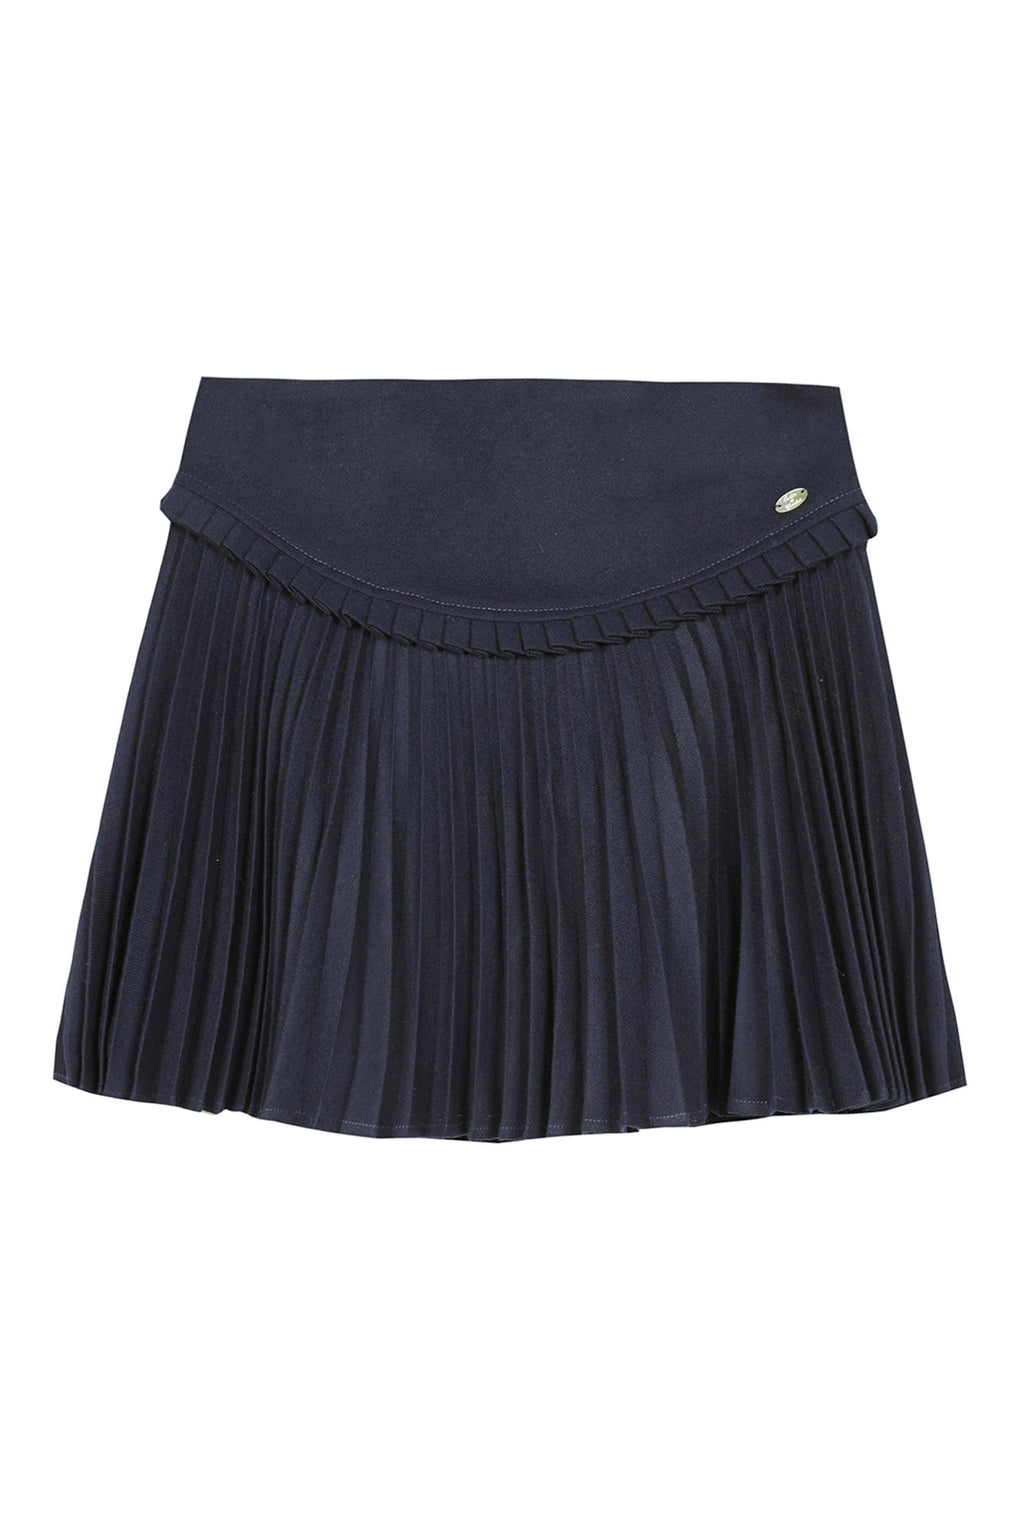 Skirt - pleated in Flannel Navy